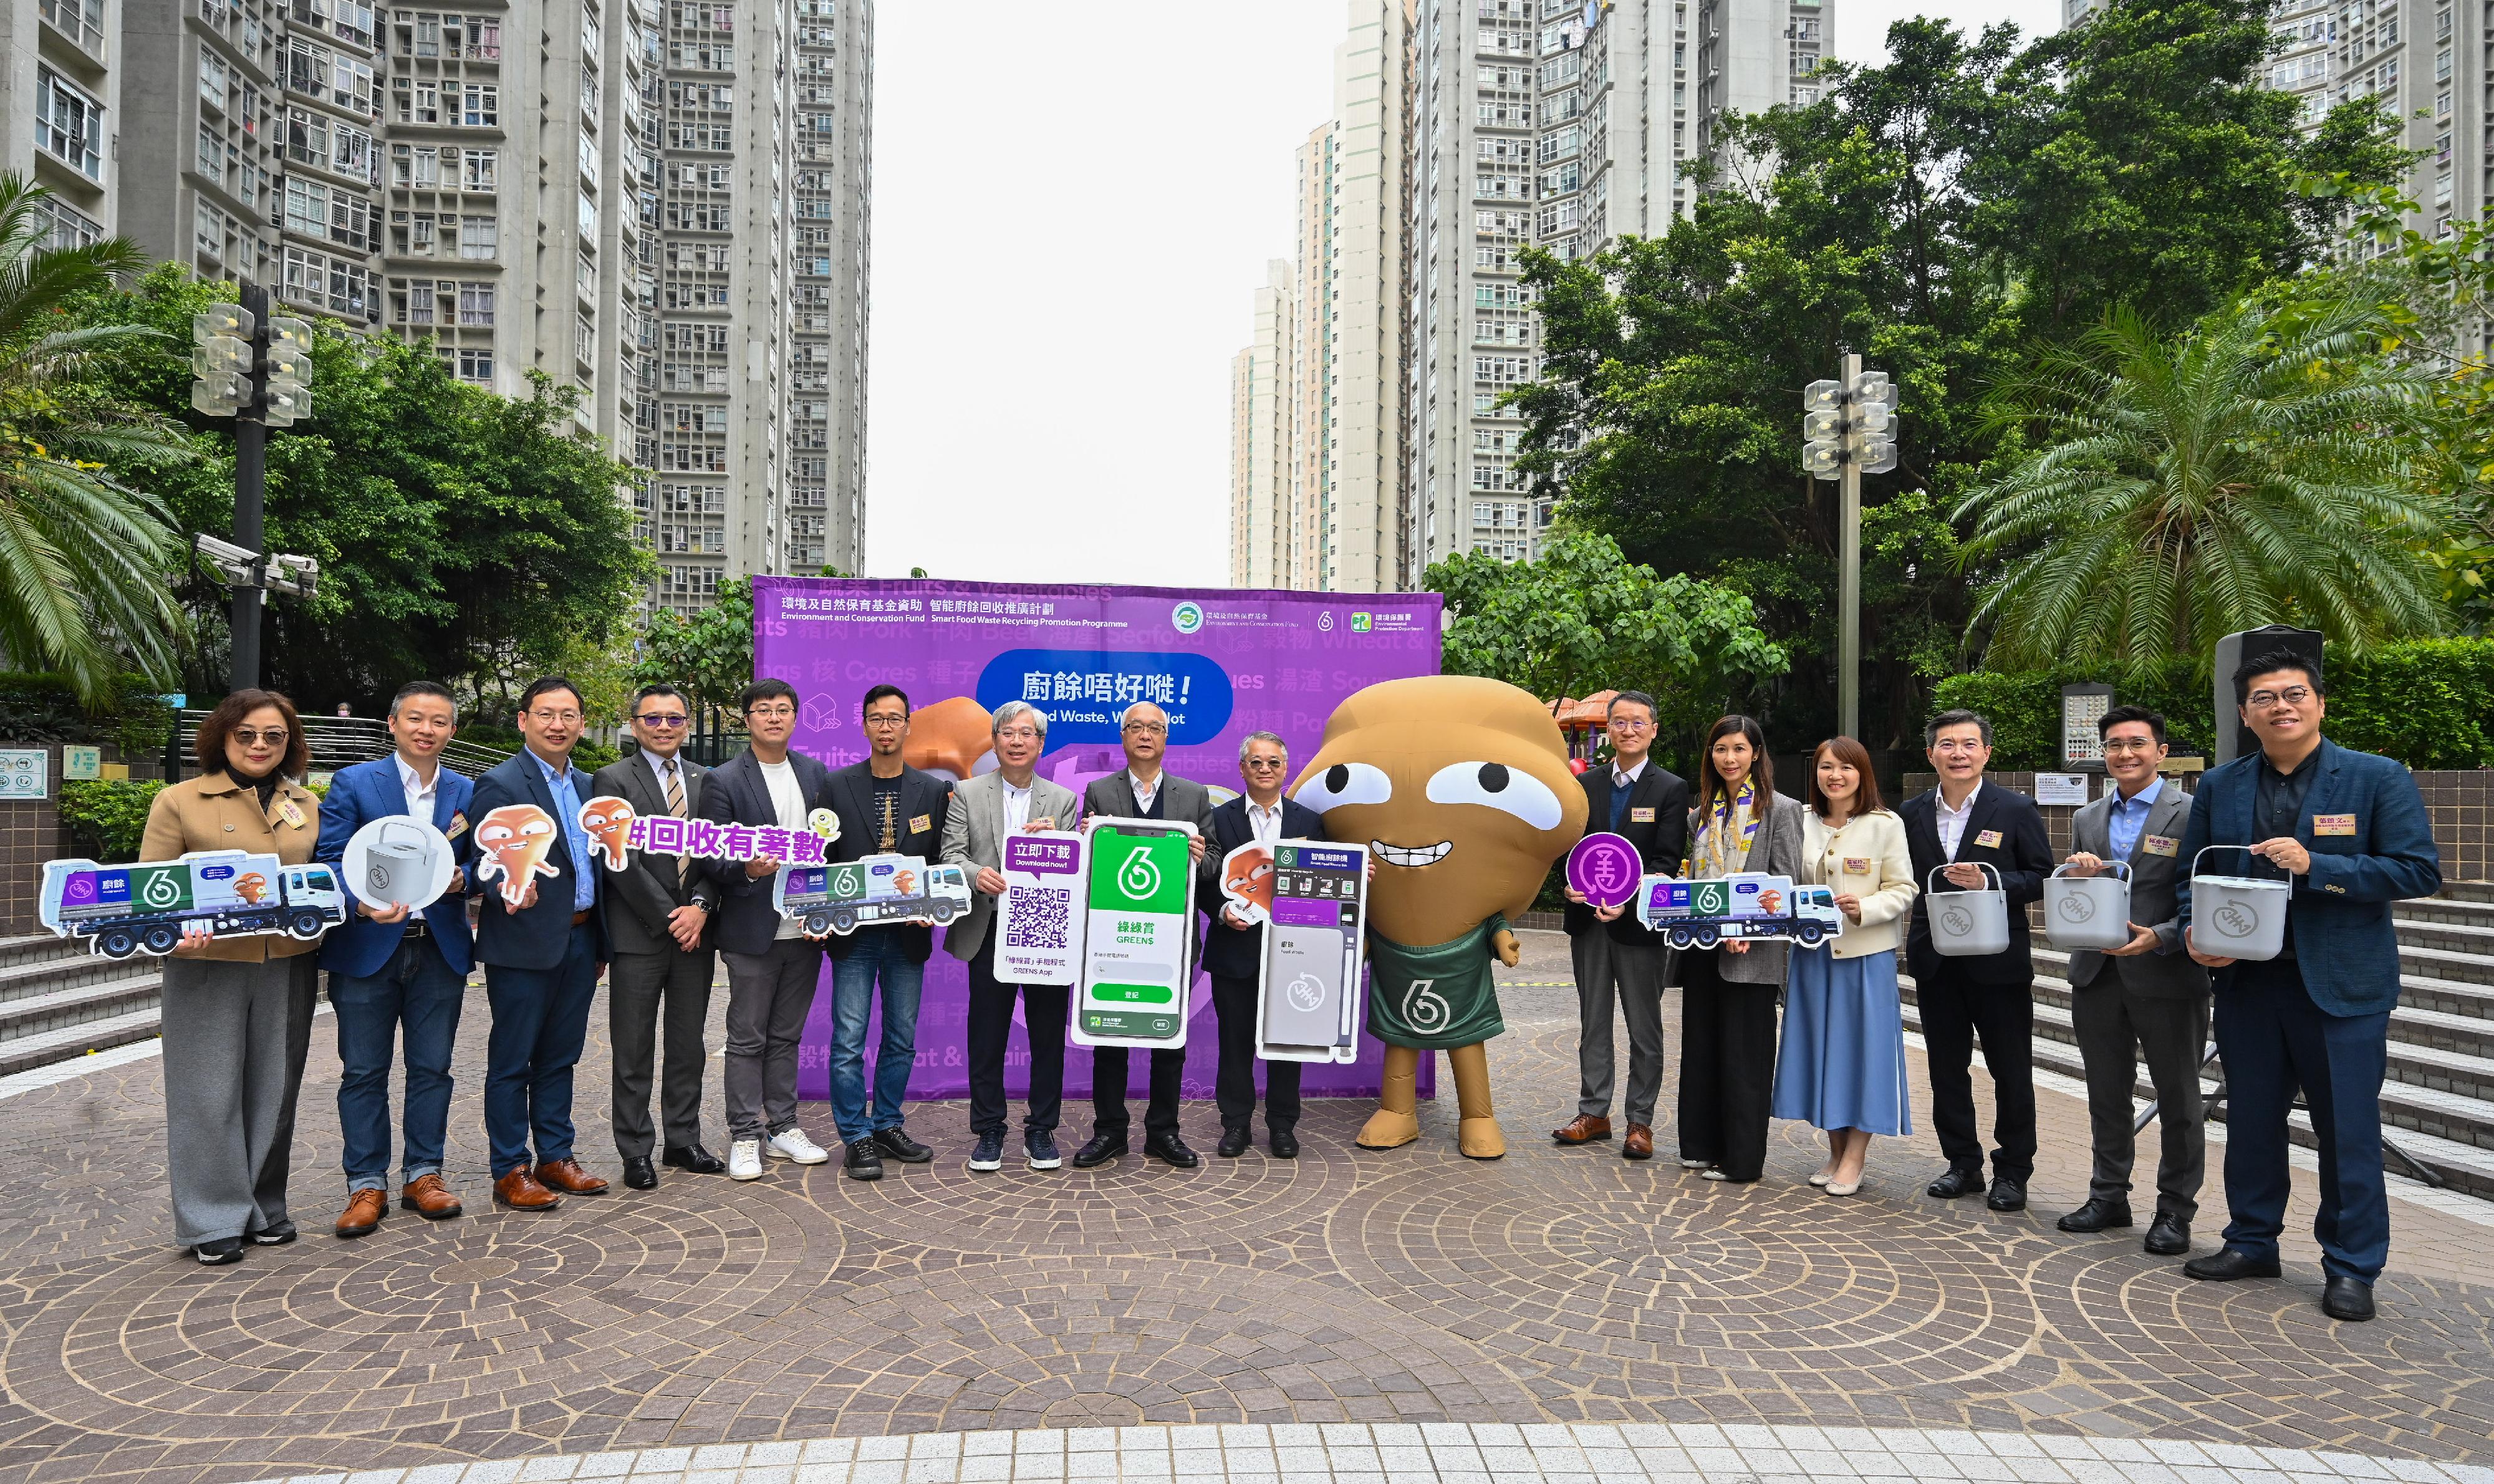 The Secretary for Environment and Ecology, Mr Tse Chin-wan, attended the launch ceremony of the Pilot Scheme on Food Waste Smart Recycling Bins in Private Housing Estates at Sceneway Garden in Lam Tin today (March 14), witnessing the introduction of the first batch of food waste smart recycling bins into large-scale private housing estates. Photo shows Mr Tse (eighth left); the Director of Environmental Protection, Dr Samuel Chui (ninth left); Deputy Director of Environmental Protection Mr Bruno Luk (sixth right); Assistant Director of Environmental Protection Dr Vanessa Au (fifth right); and the Chairman of the Estate Owners' Committee of Sceneway Garden, Mr Joe Lam (seventh left) at the launch ceremony with other guests.